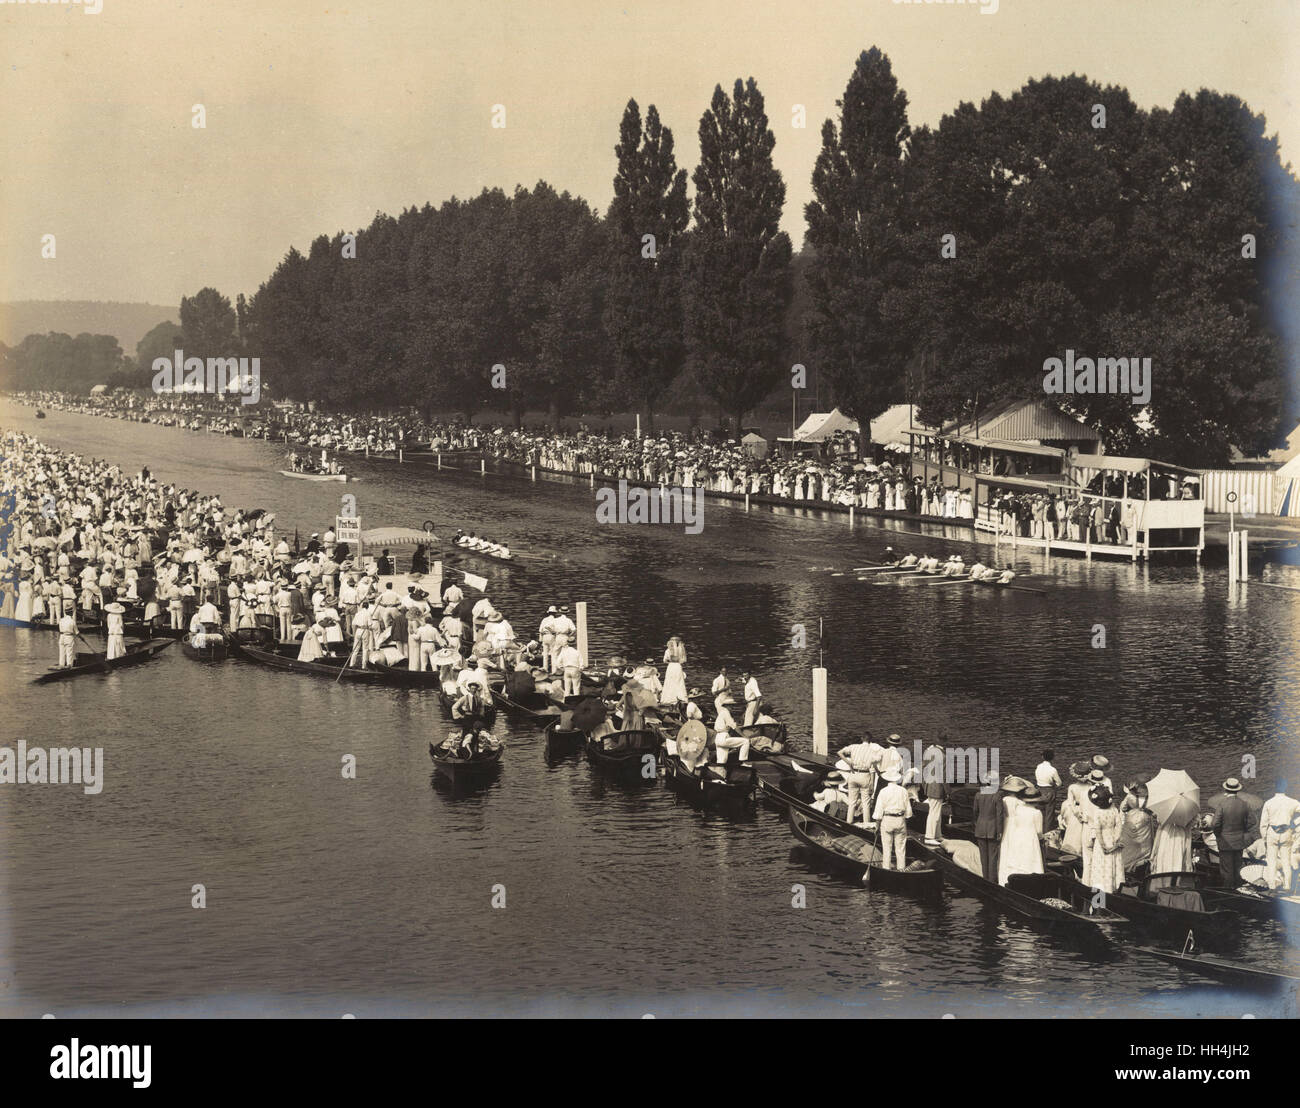 A rowing regatta on a summer's day. Stock Photo